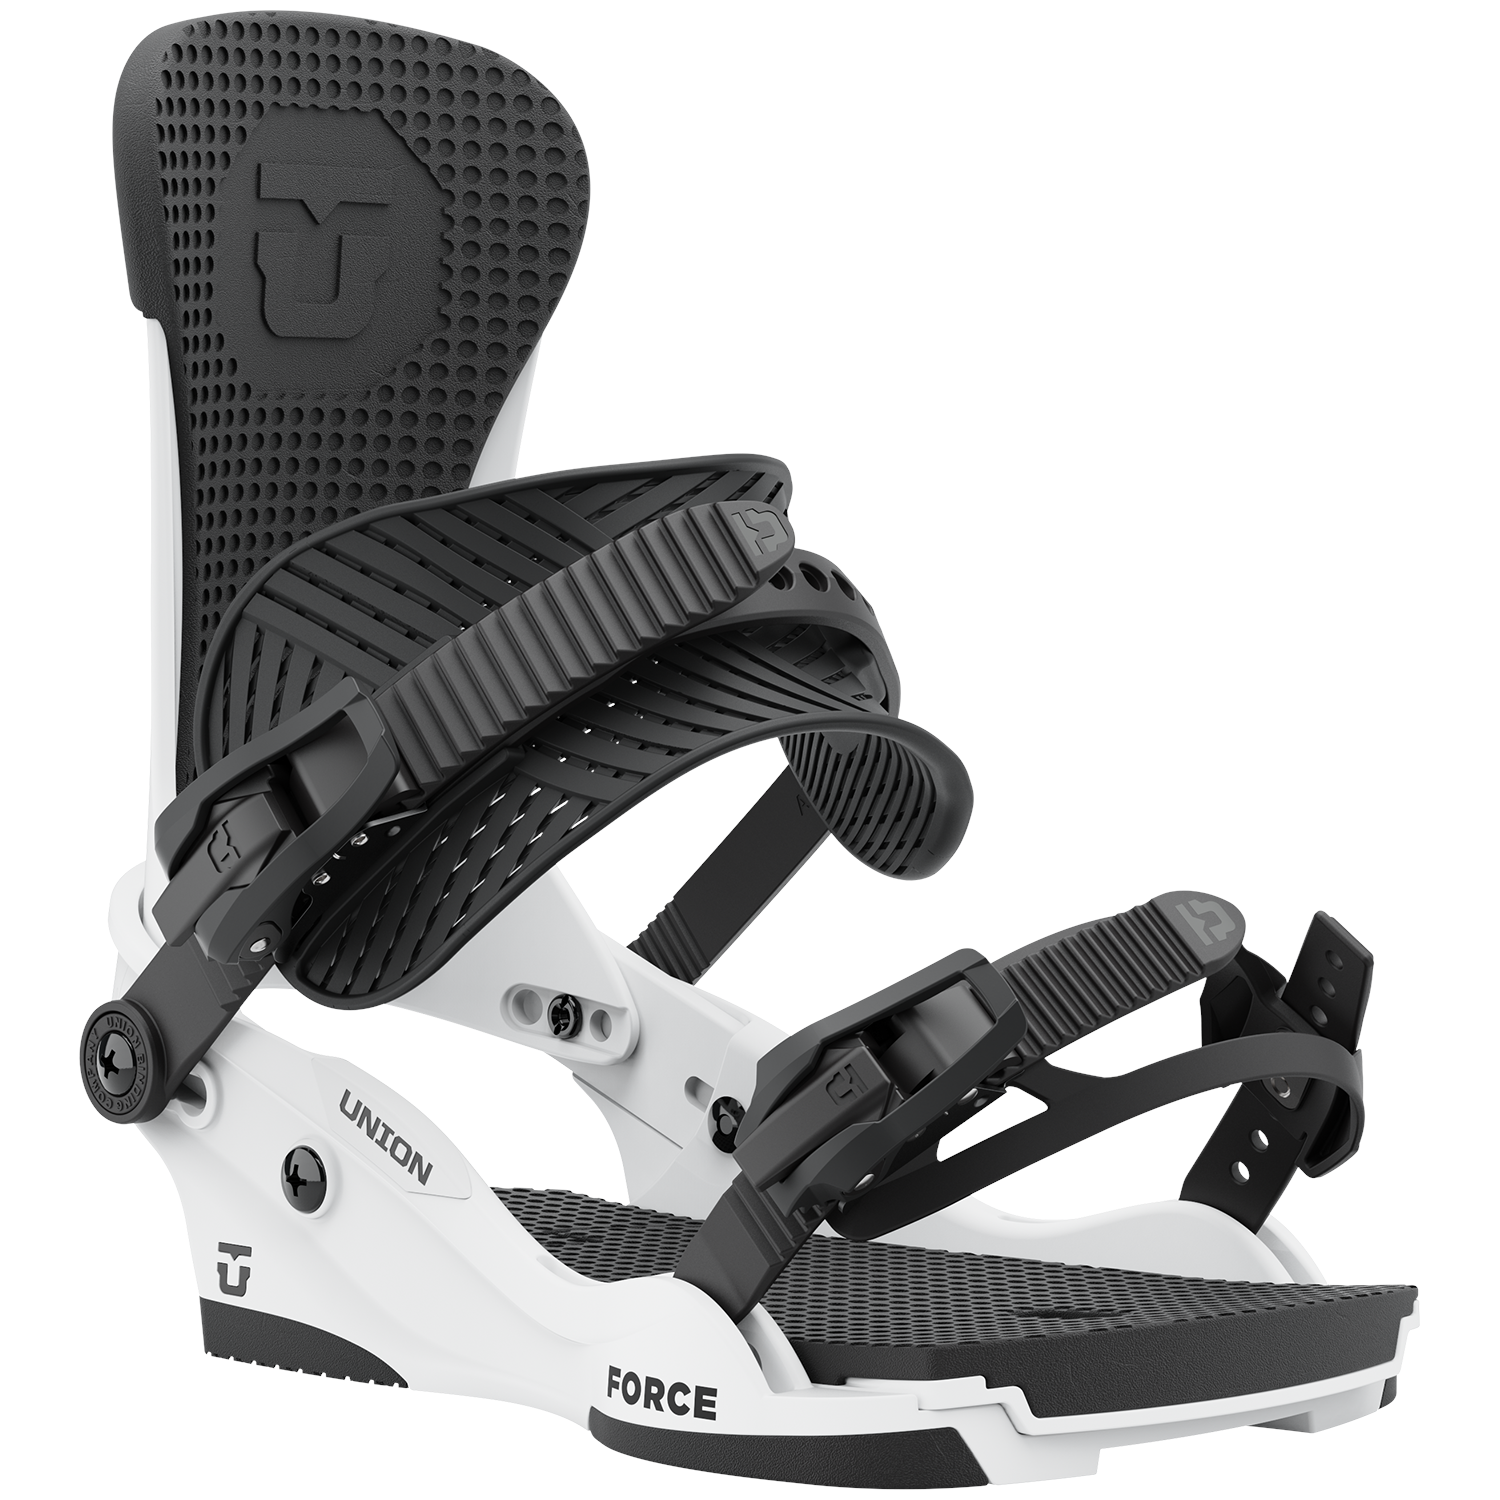 Details about   Union Force Snowboard Bindings Large 